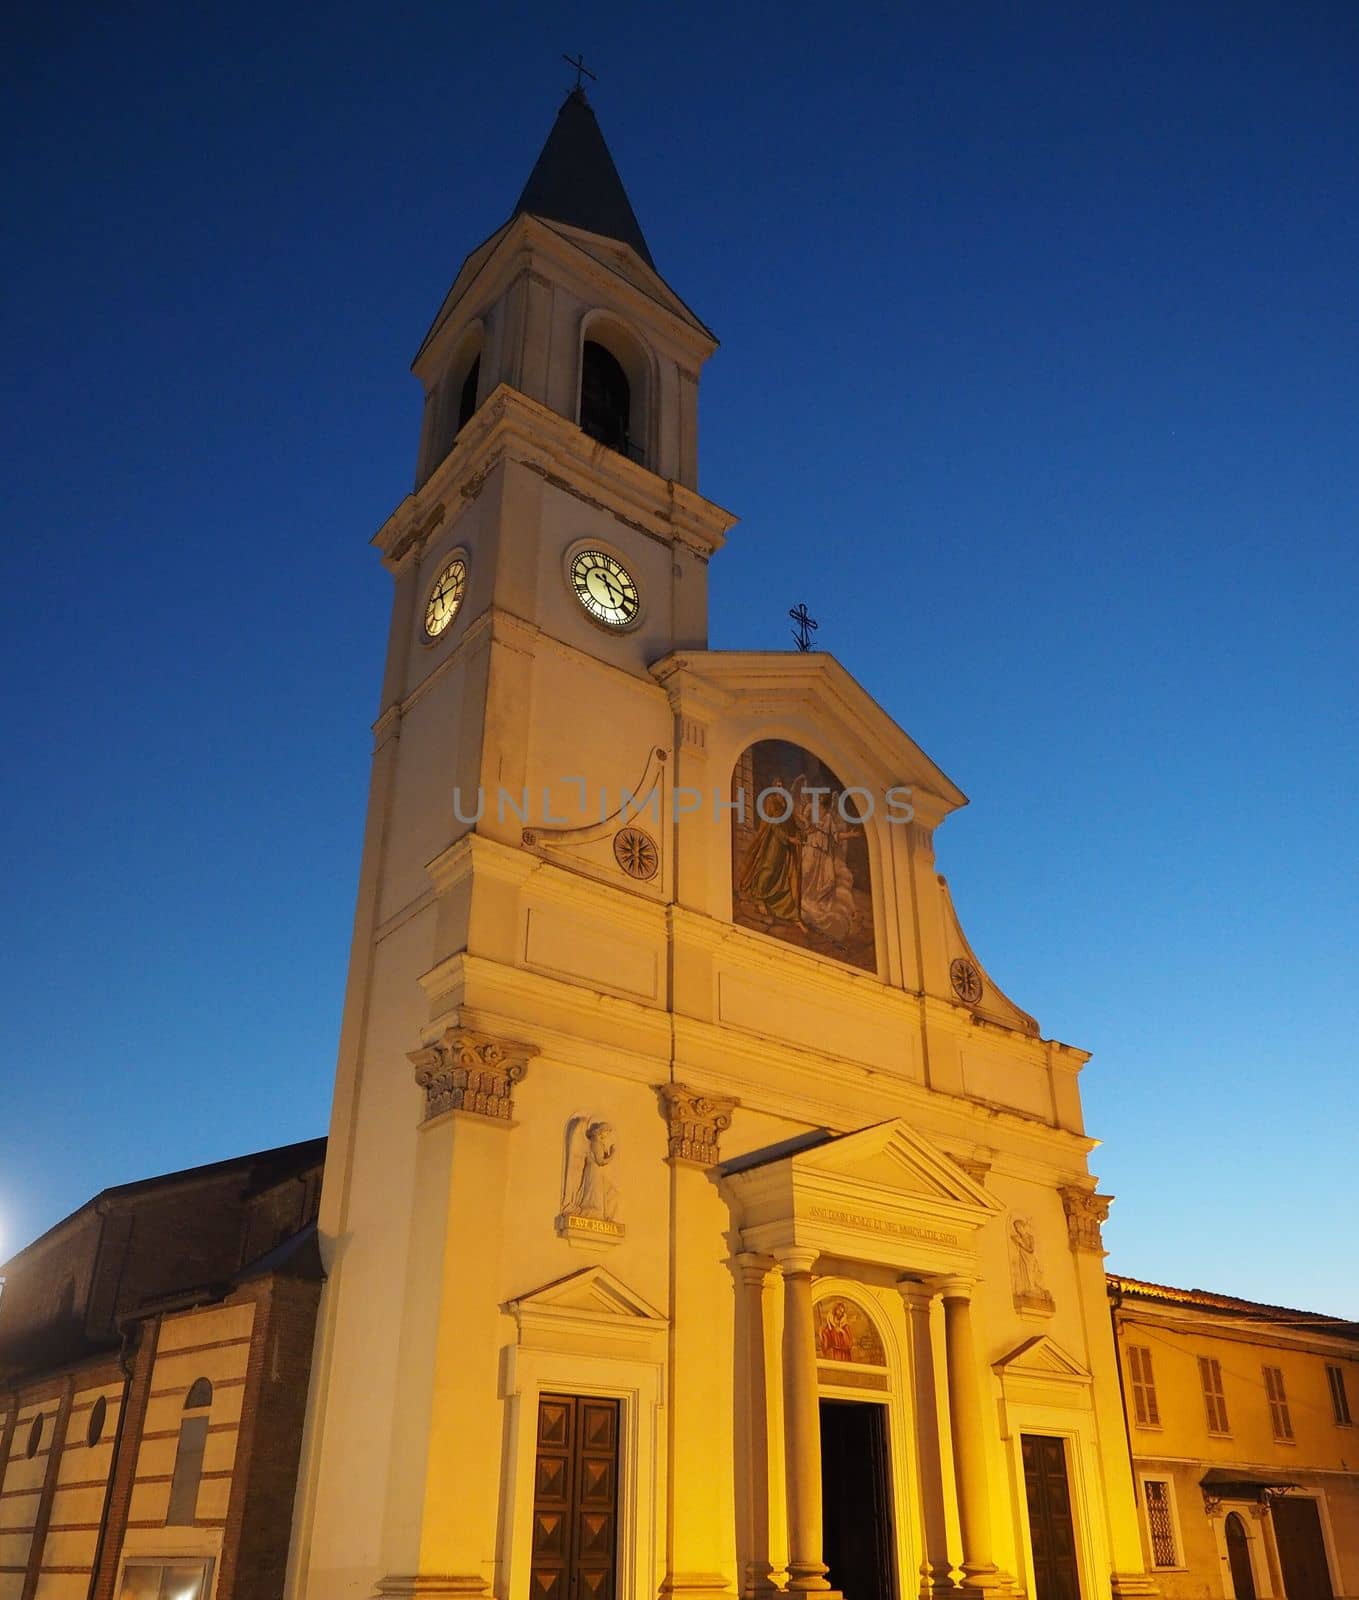 San Pietro in Vincoli (meaning St Peter in Chains) church at night in Settimo Torinese, Italy